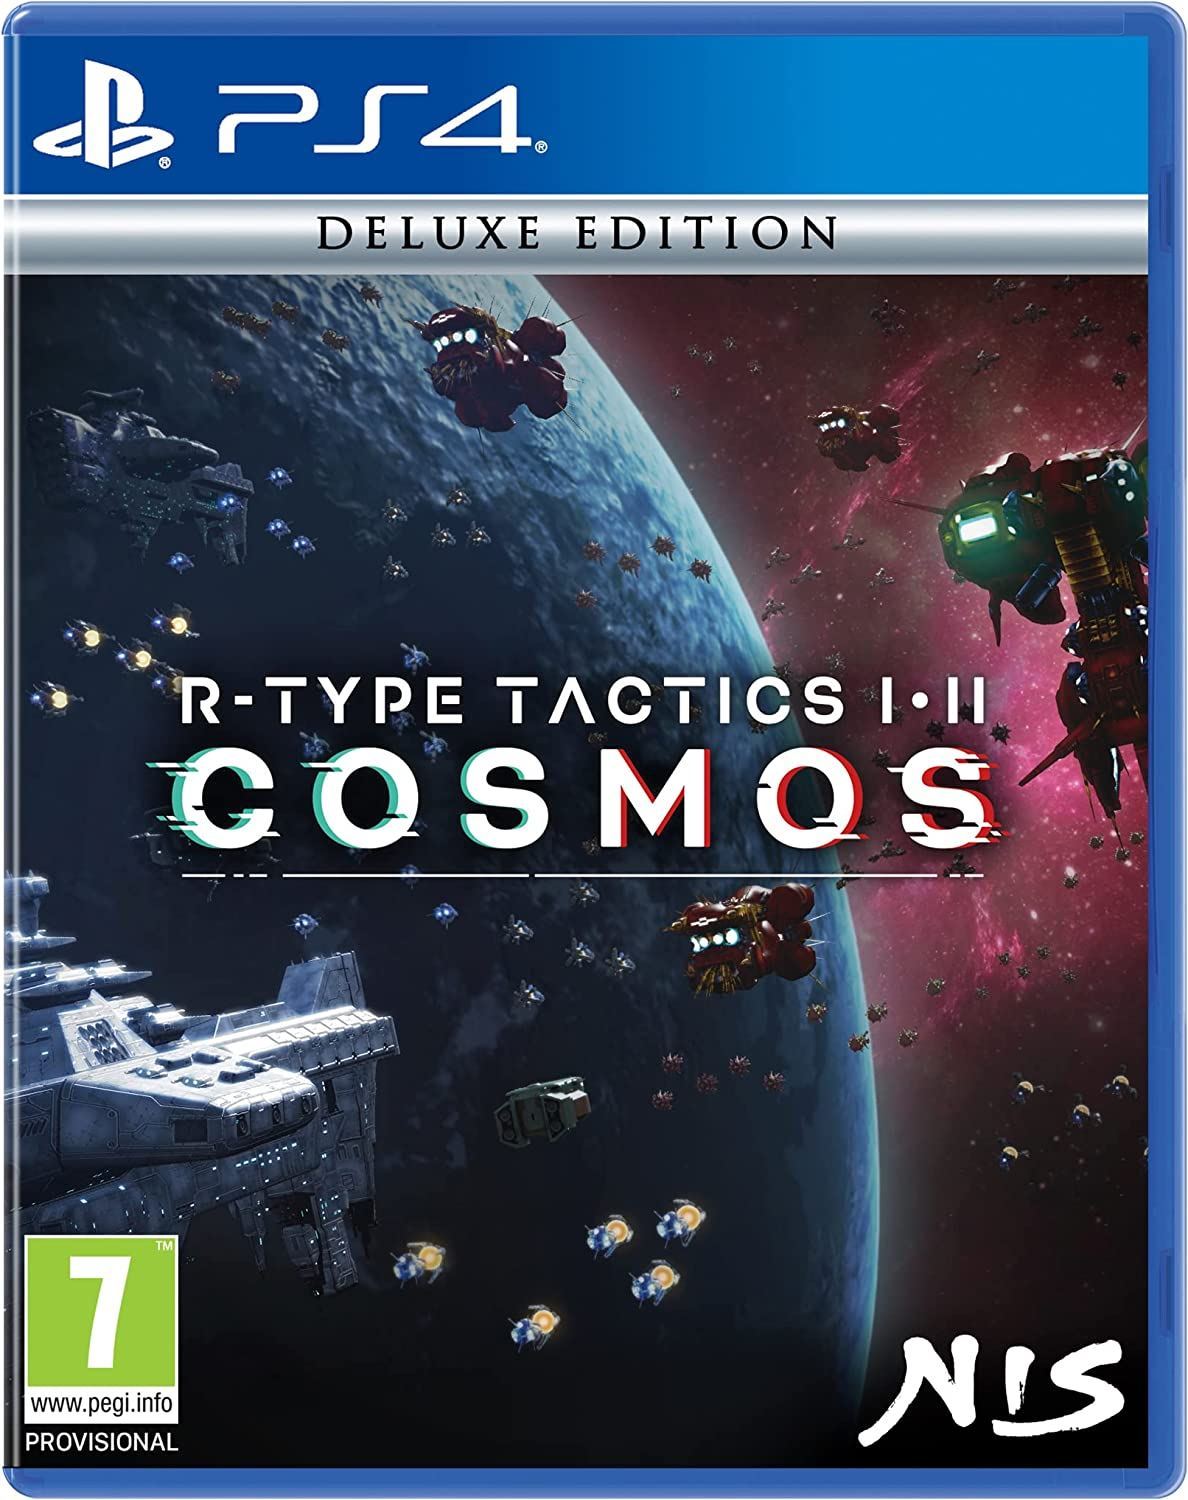 R-Type Tactics I - II Cosmos Deluxe Edition PS4